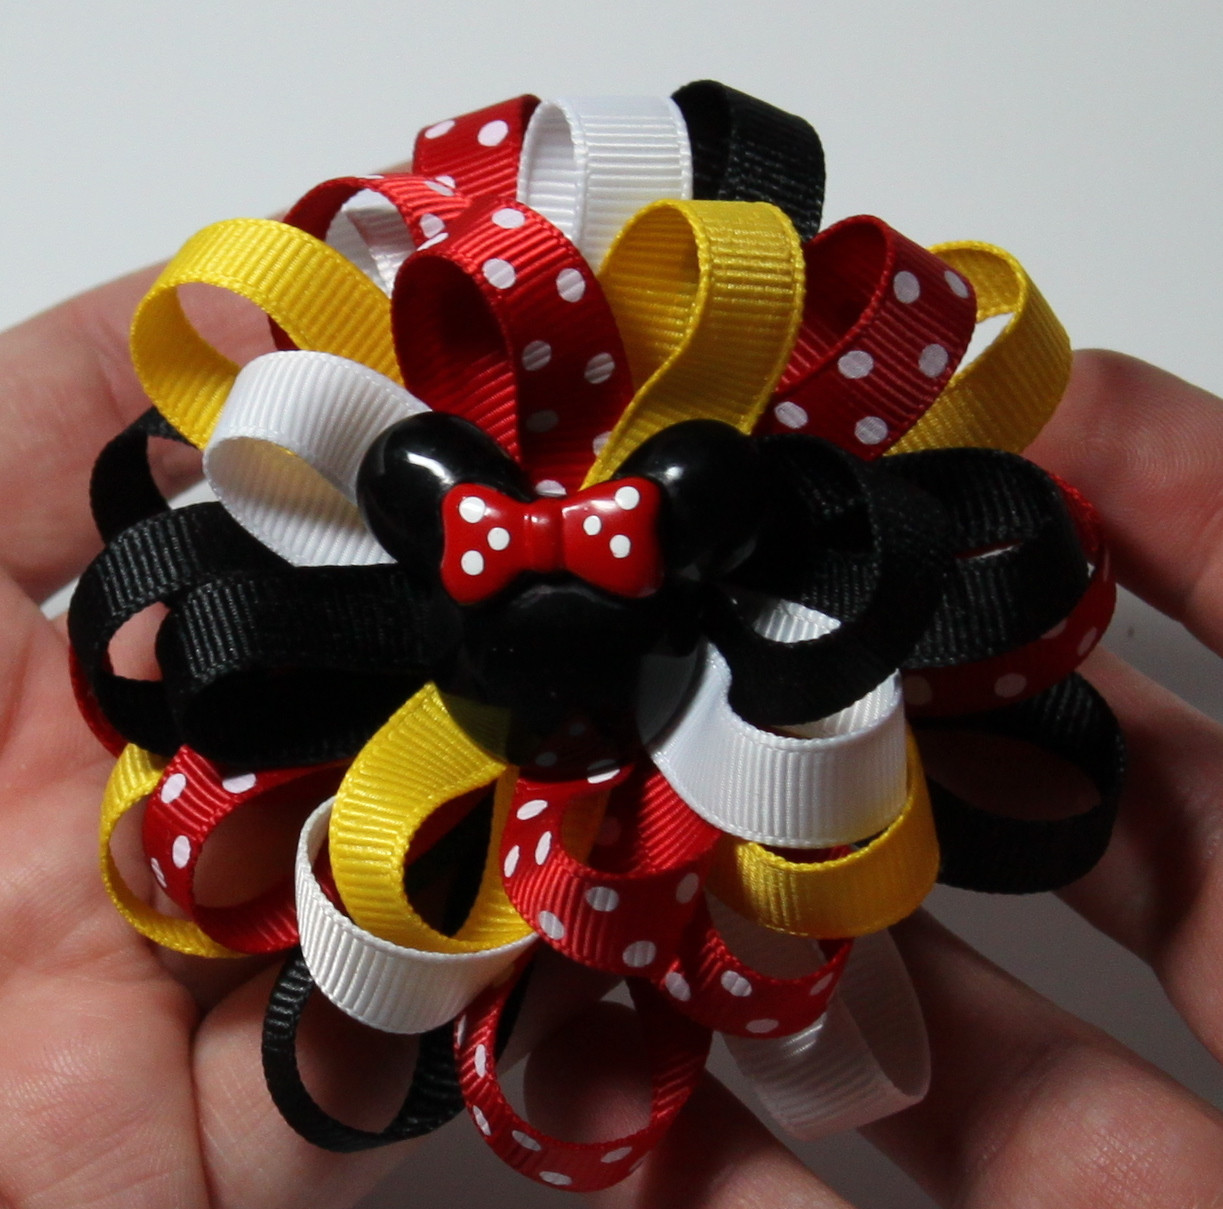 DIY Hair Bow Tutorials
 Ribbons and Much More Loopy Flower Hair Bow Tutorial